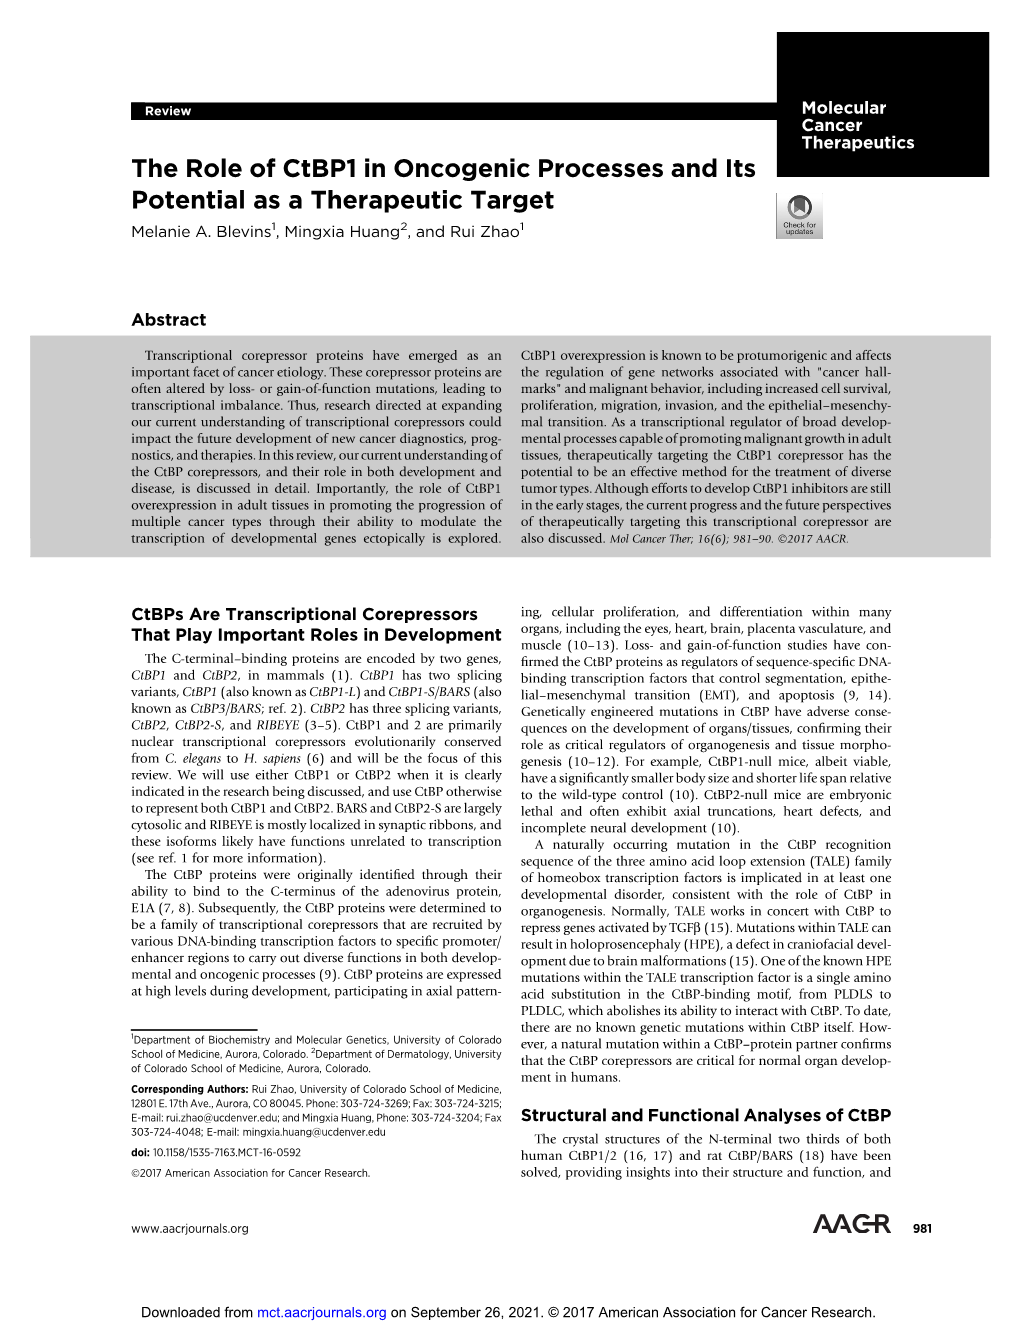 The Role of Ctbp1 in Oncogenic Processes and Its Potential As a Therapeutic Target Melanie A